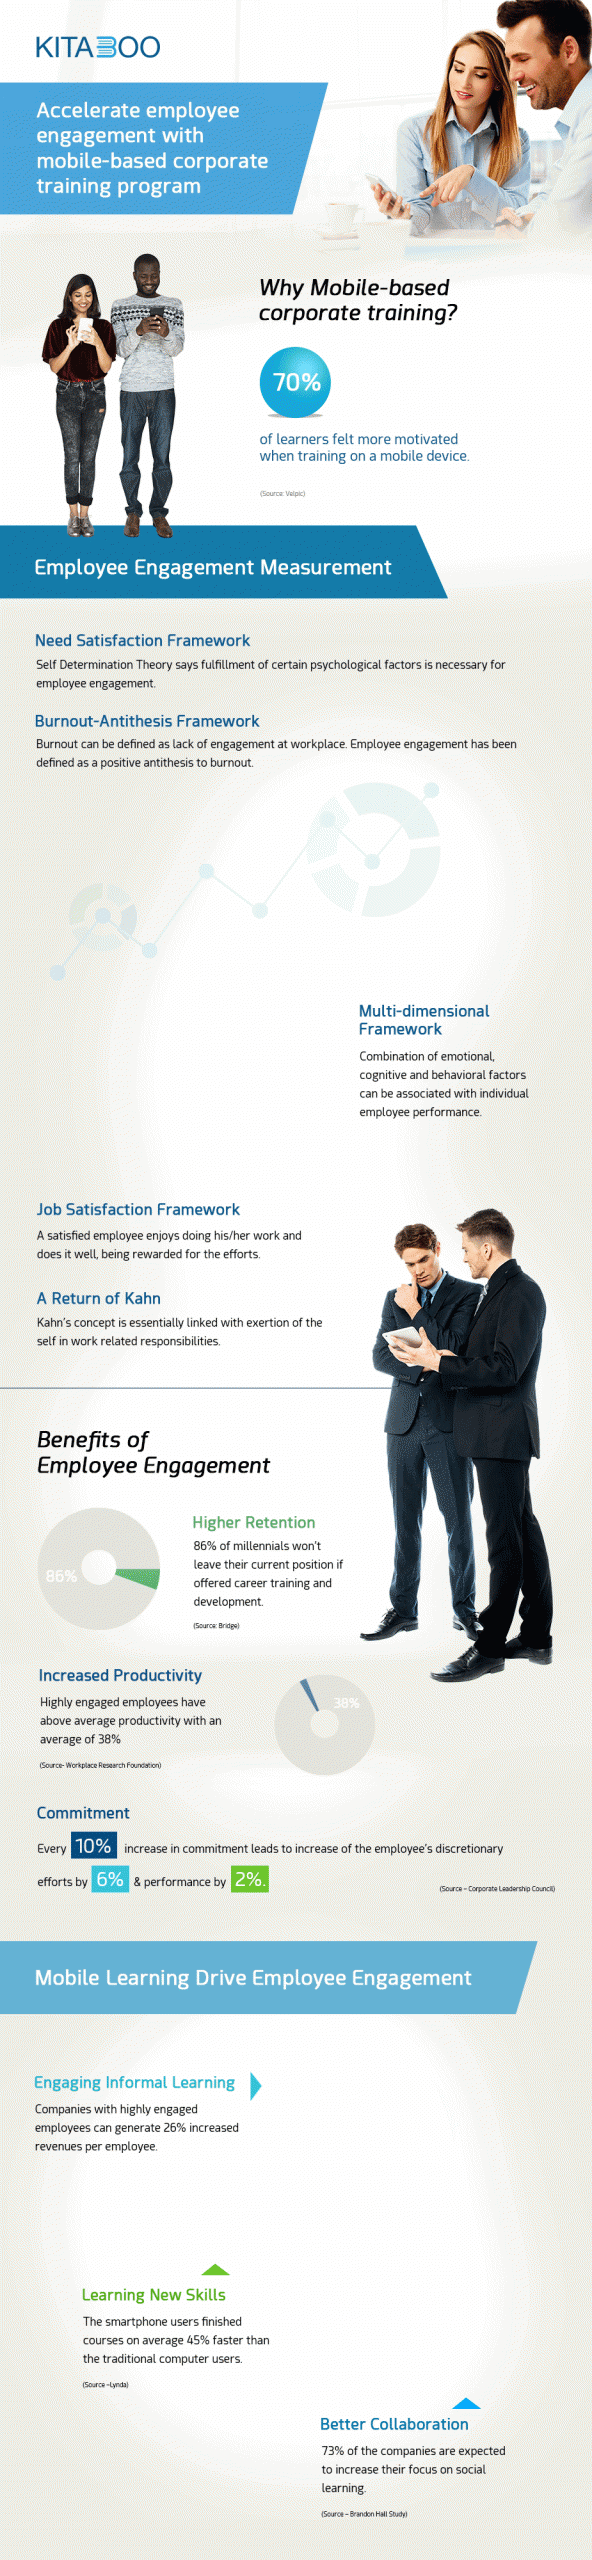 An infographic on Accelerate Employee Engagement With Mobile Based Corporate Training Program